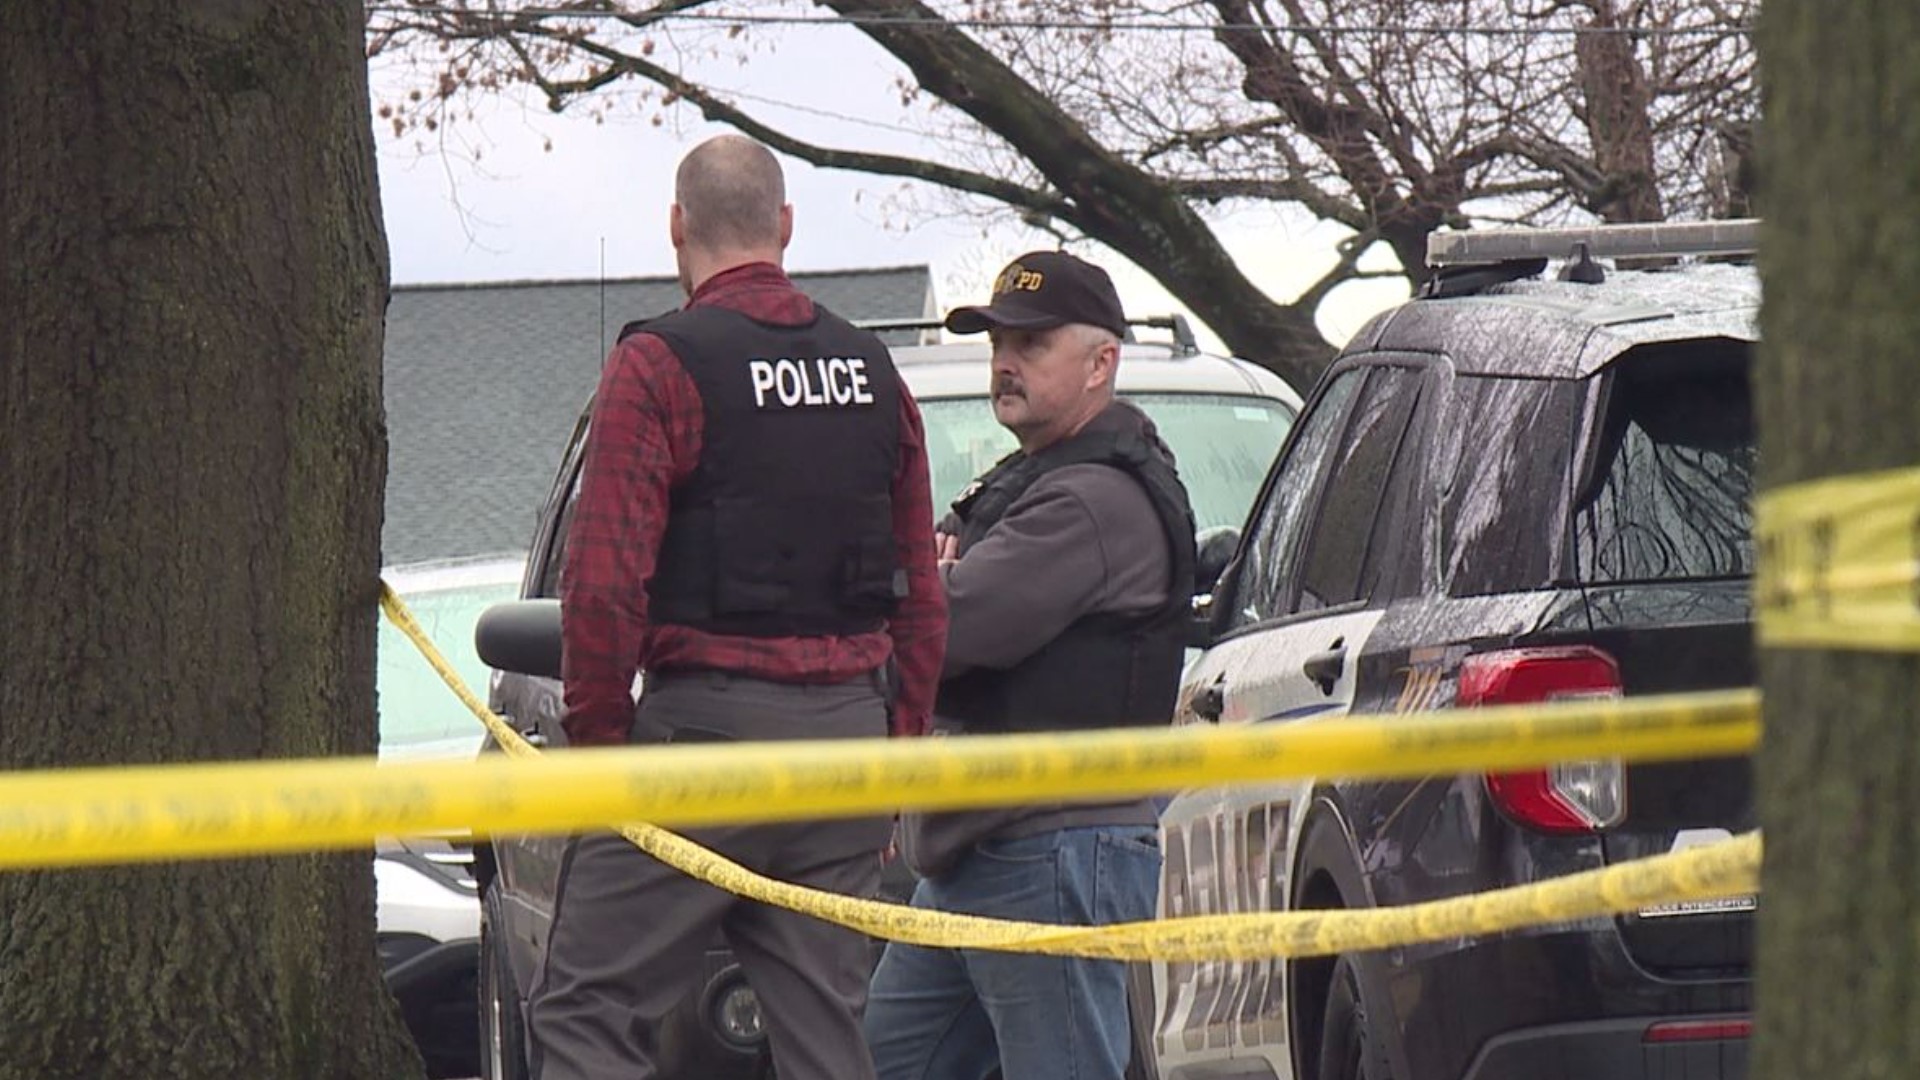 A 17-year-old juvenile, a 49-year-old woman and a 50-year-old man were all pronounced dead after a stabbing Thursday morning in Hanover.